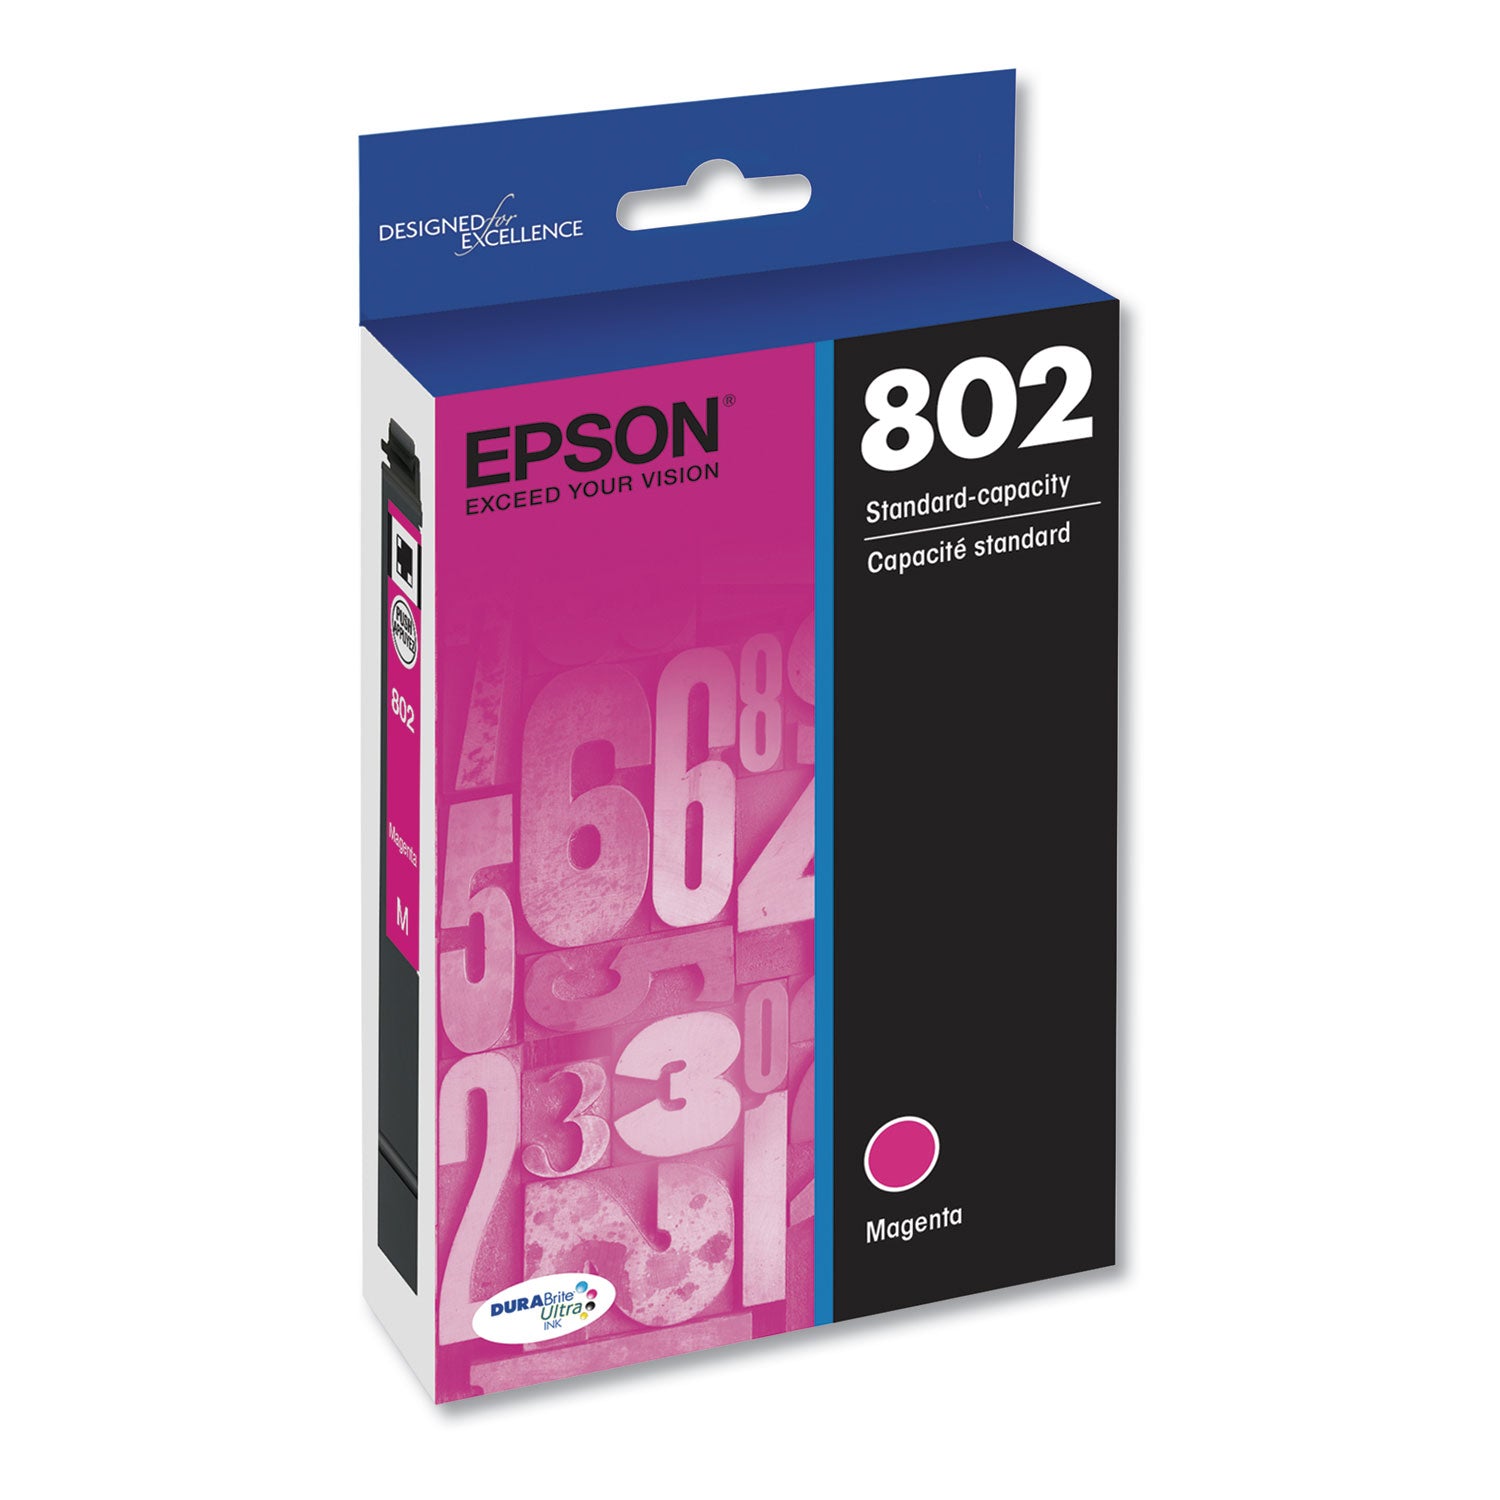 t802320-s-802-durabrite-ultra-ink-650-page-yield-magenta_epst802320s - 2